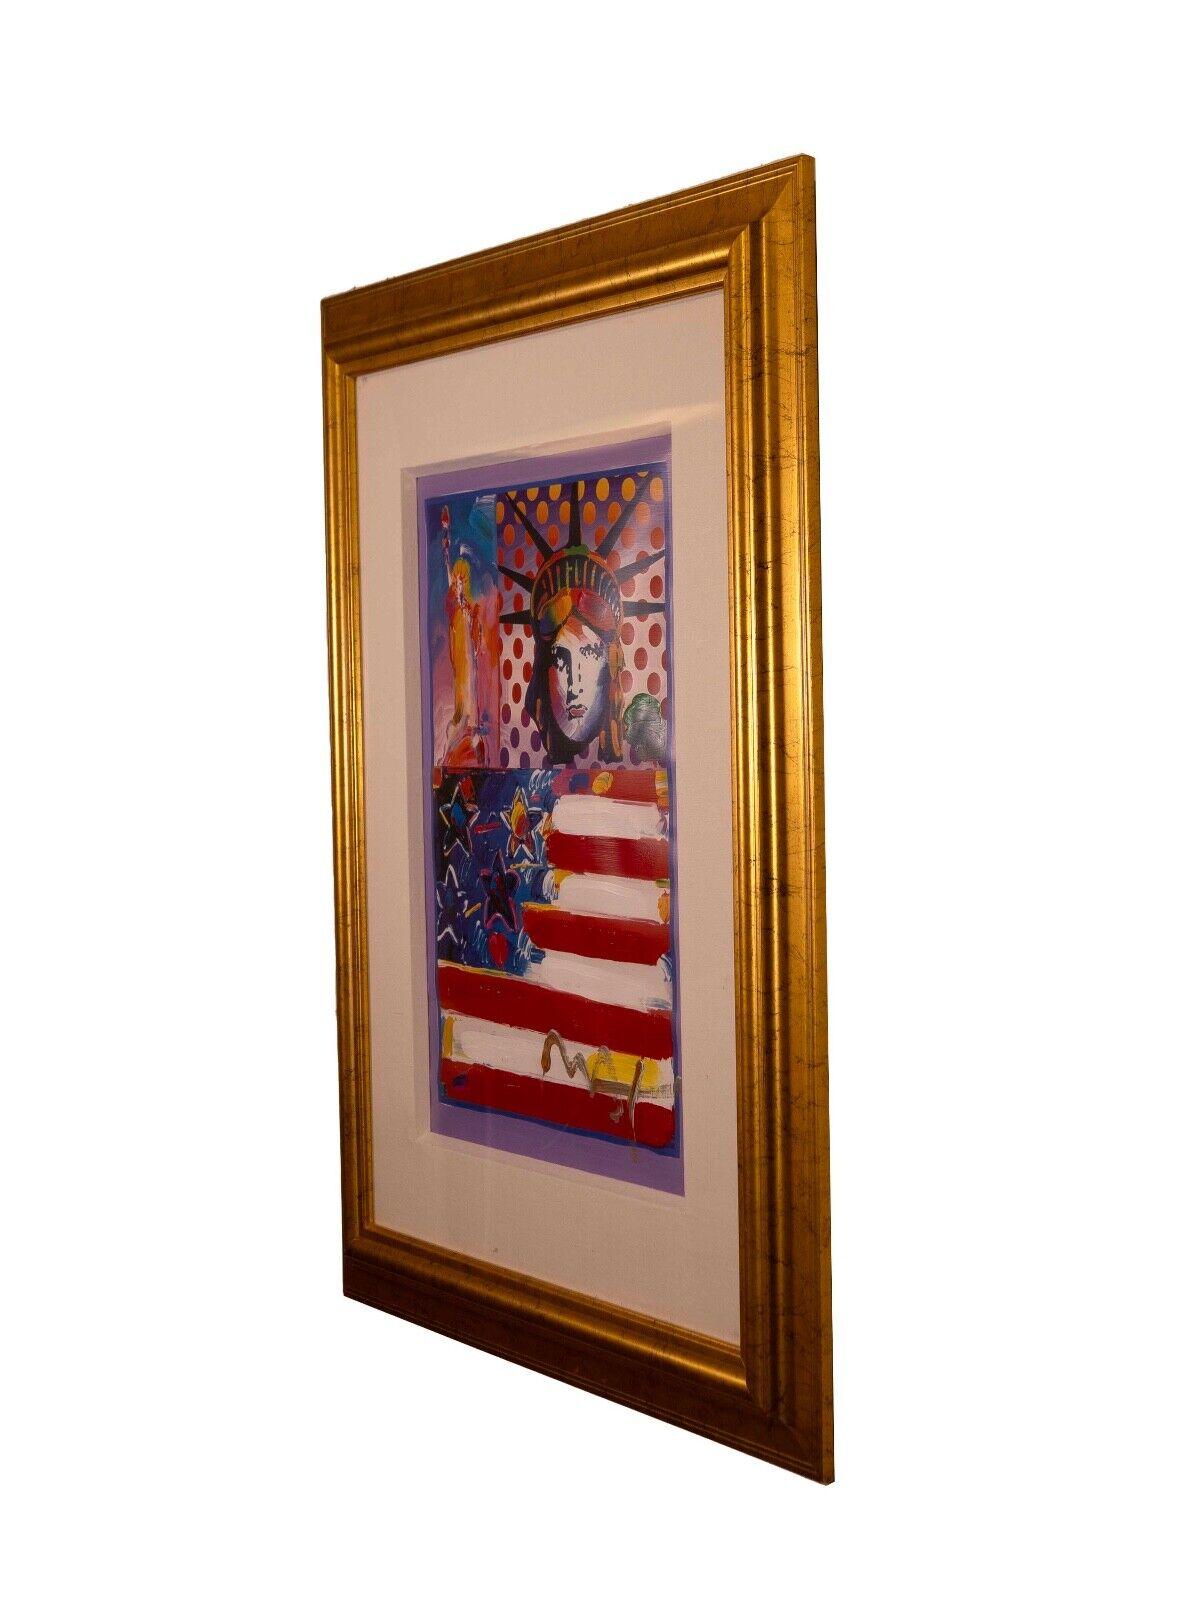 Peter Max God Bless America II Signed Mixed Media Acrylic Painting on Paper 2001 In Good Condition For Sale In Keego Harbor, MI